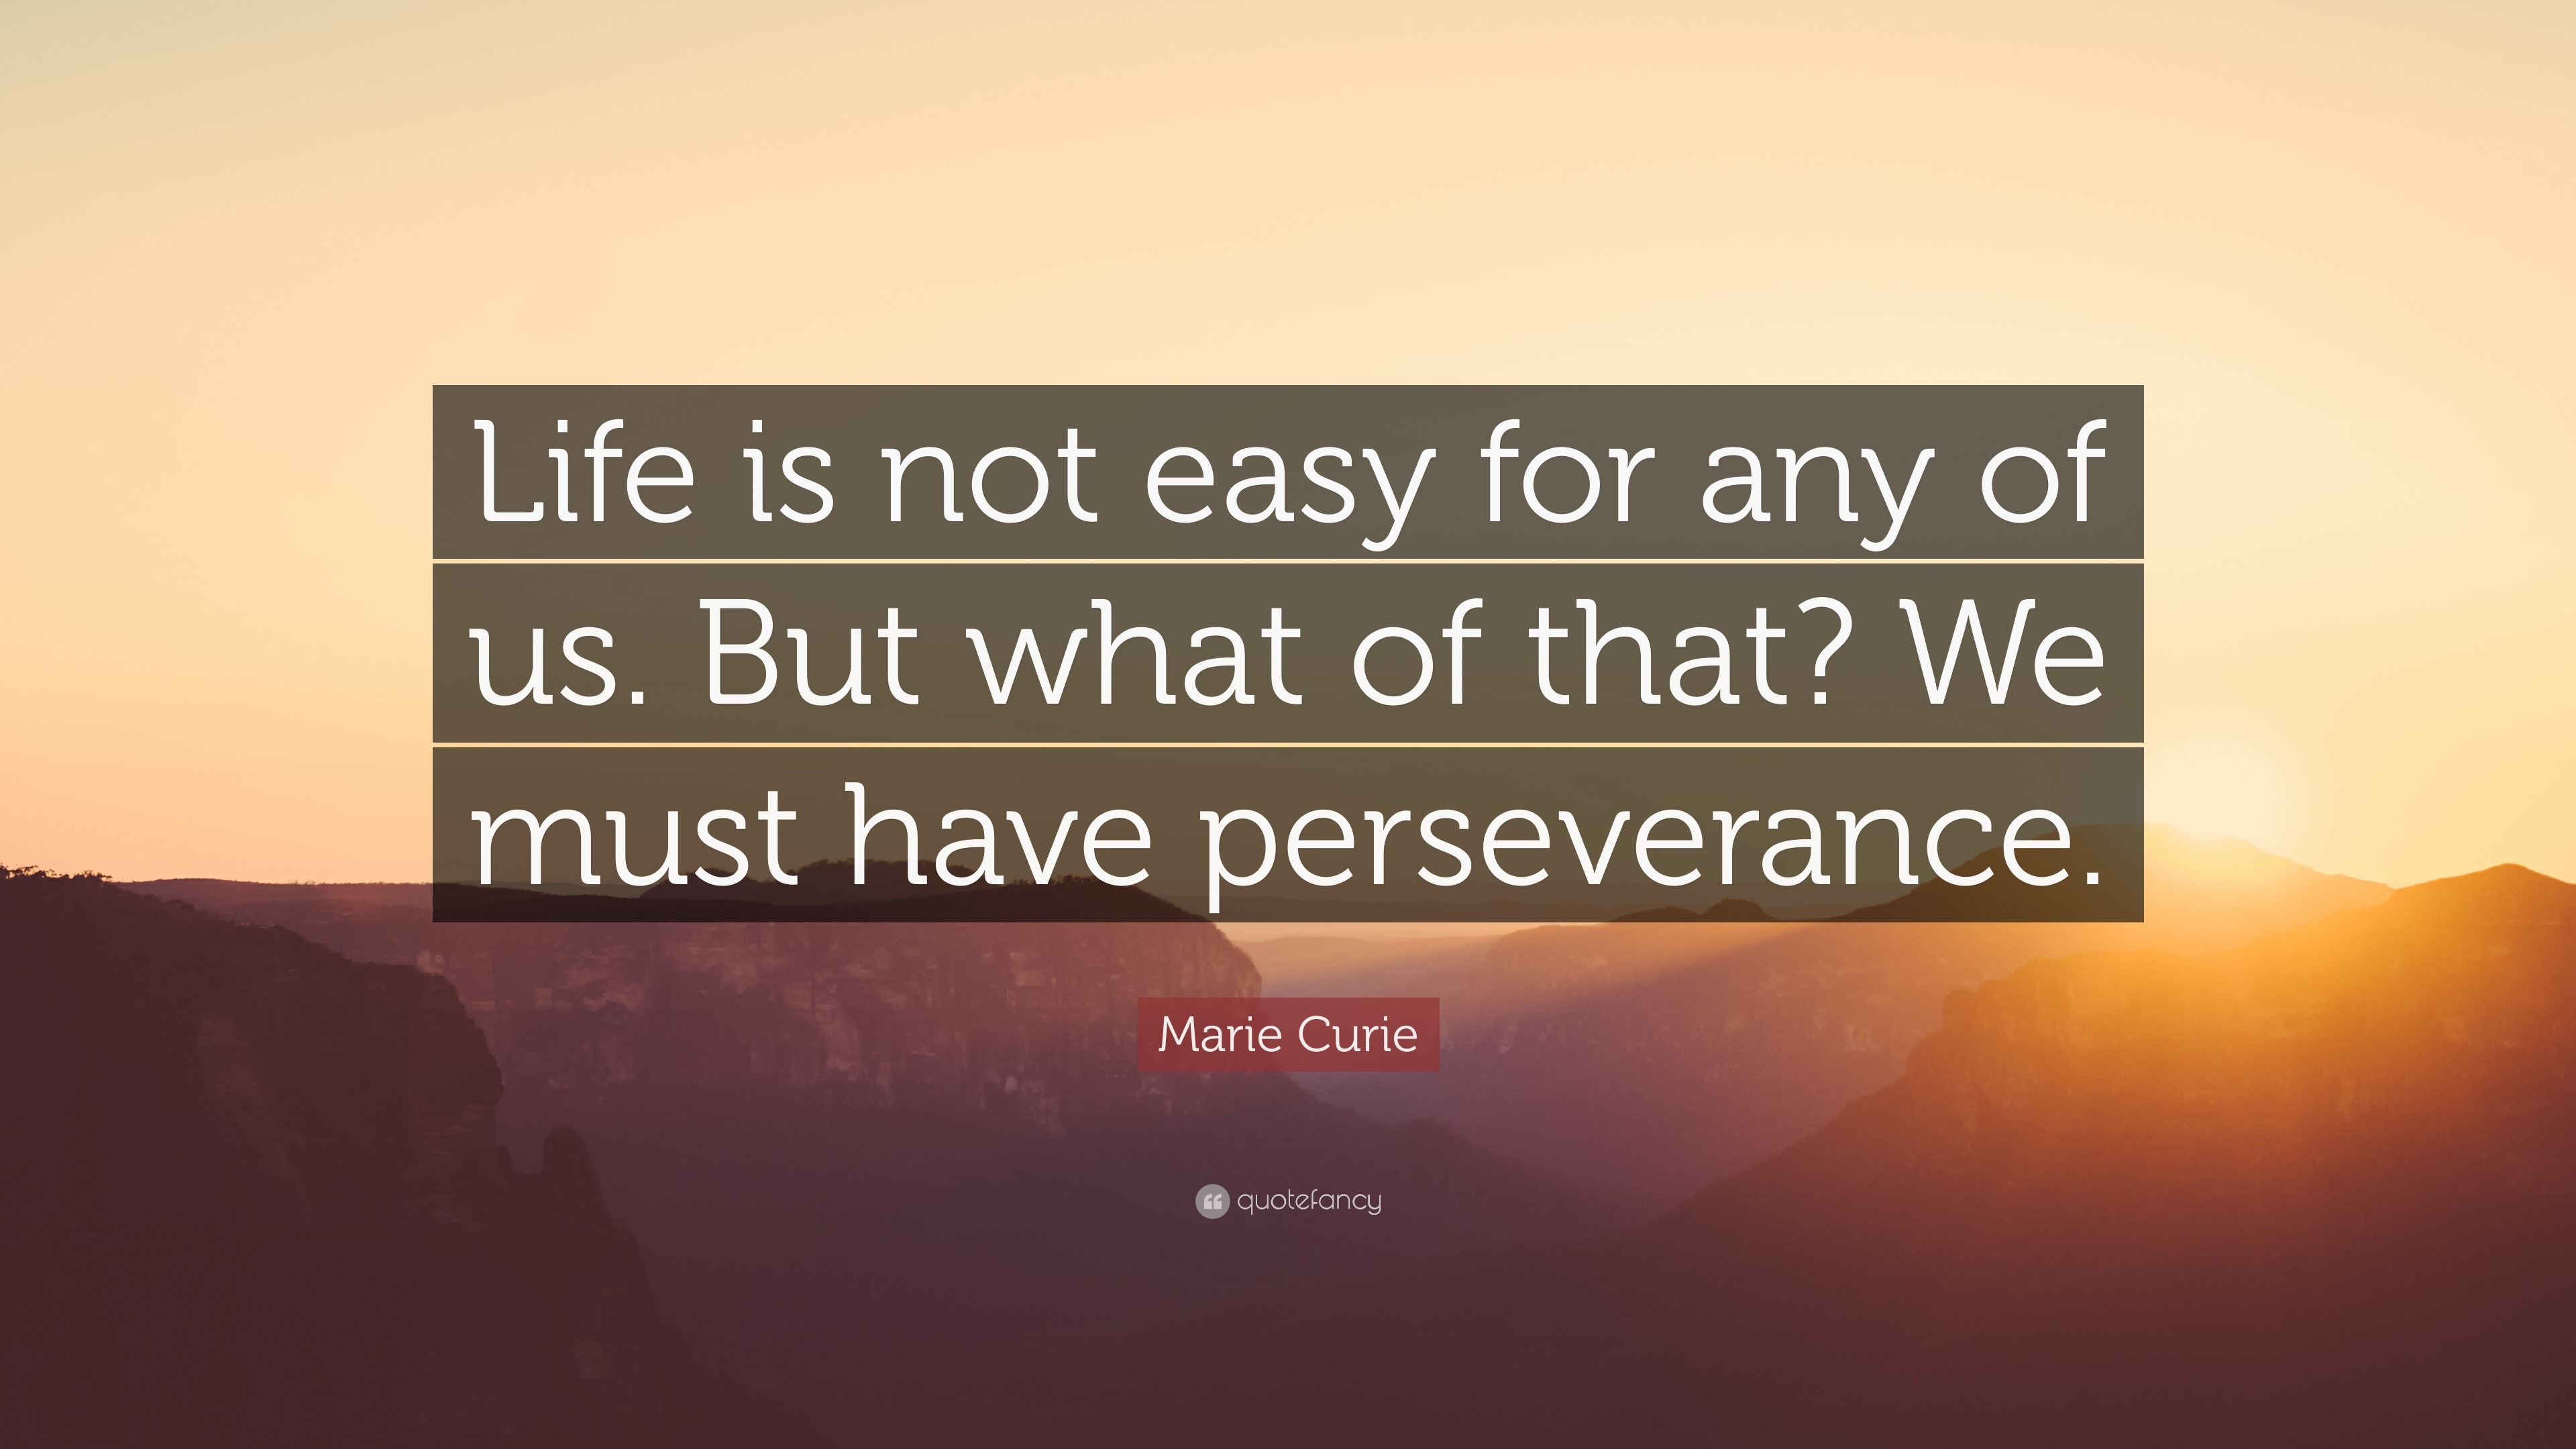 but what of that? we must have perseverance.